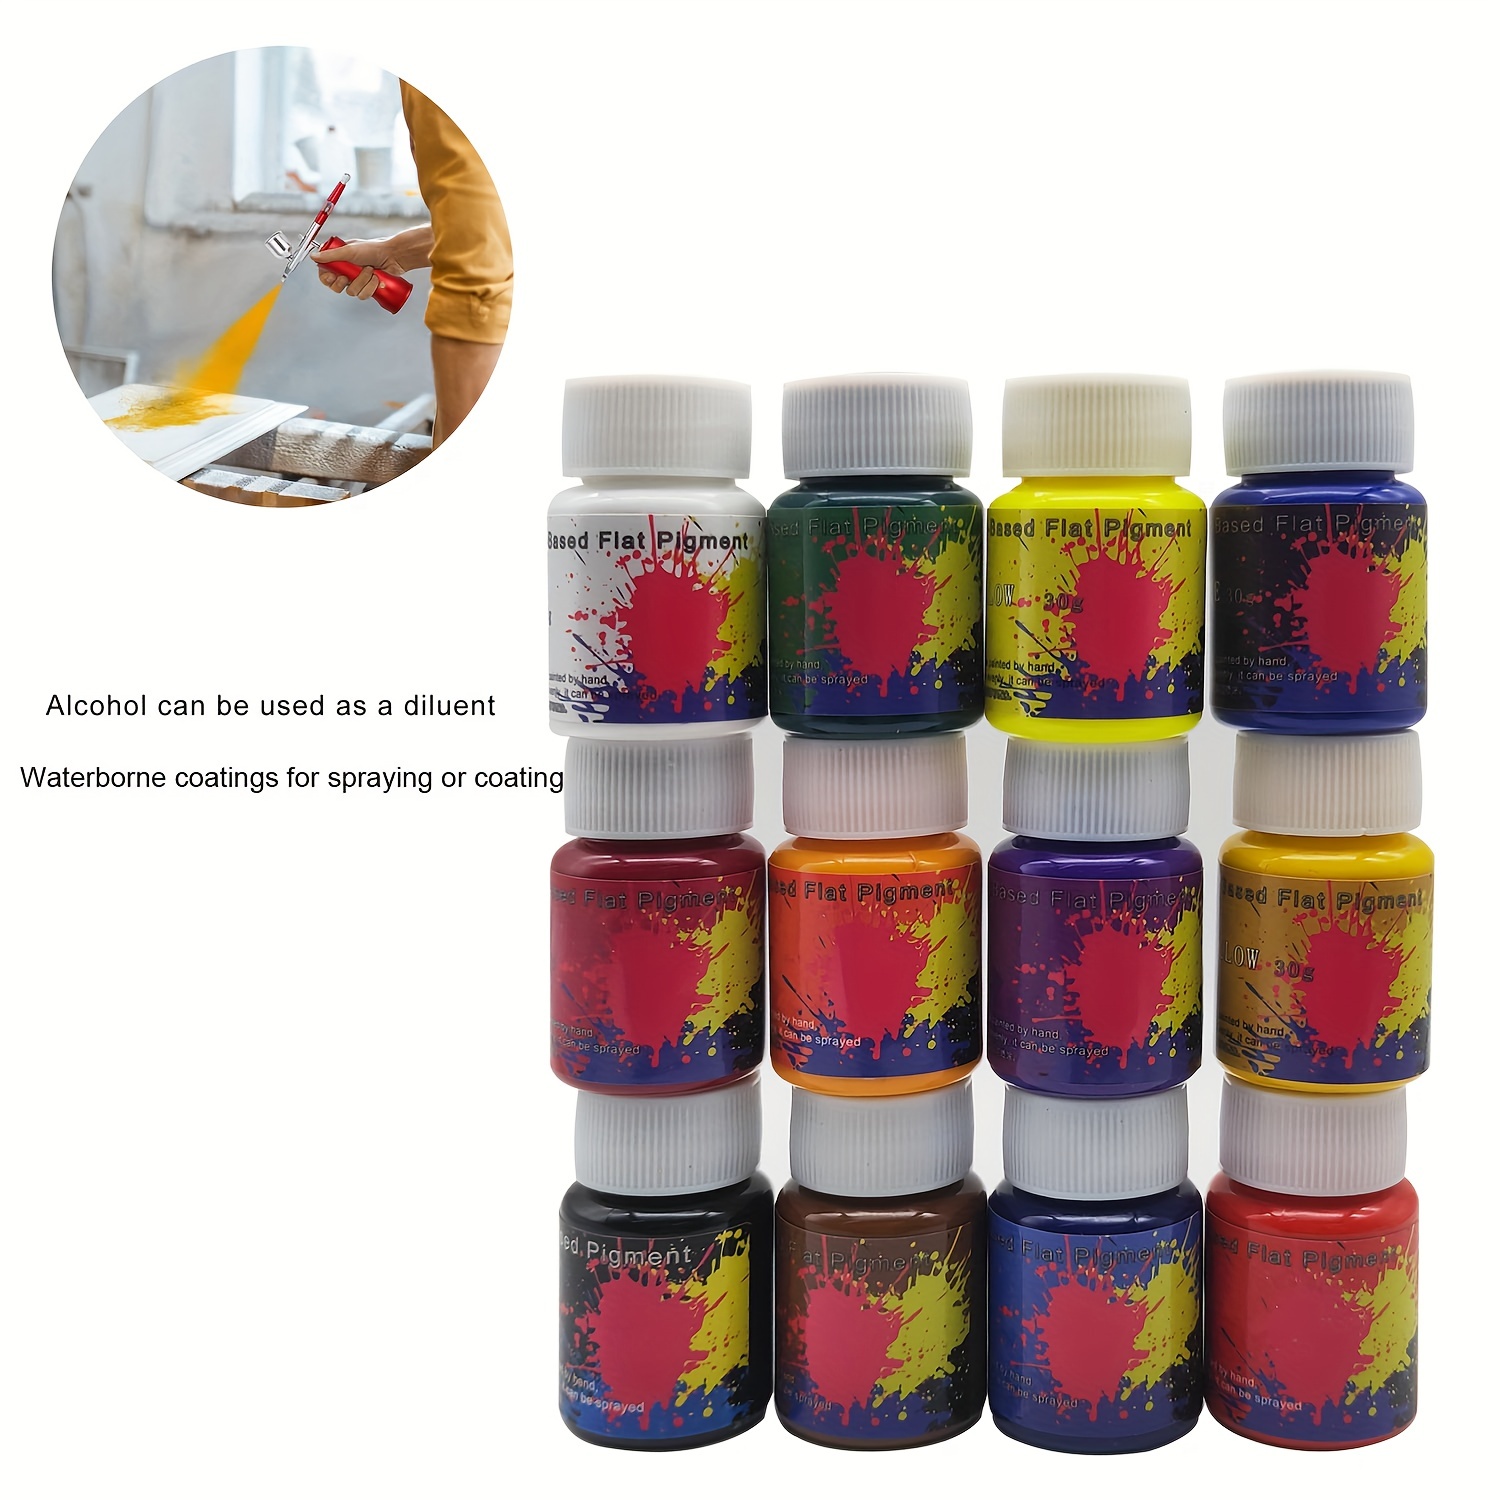 HOMY ARTY Fabric Paints, Glow in the Dark Paint -10 Colors x 30ml  Long-Lasting Luminous Glow Acrylic Paint for T-Shirt, Canvas, Art Supplies,  DIY